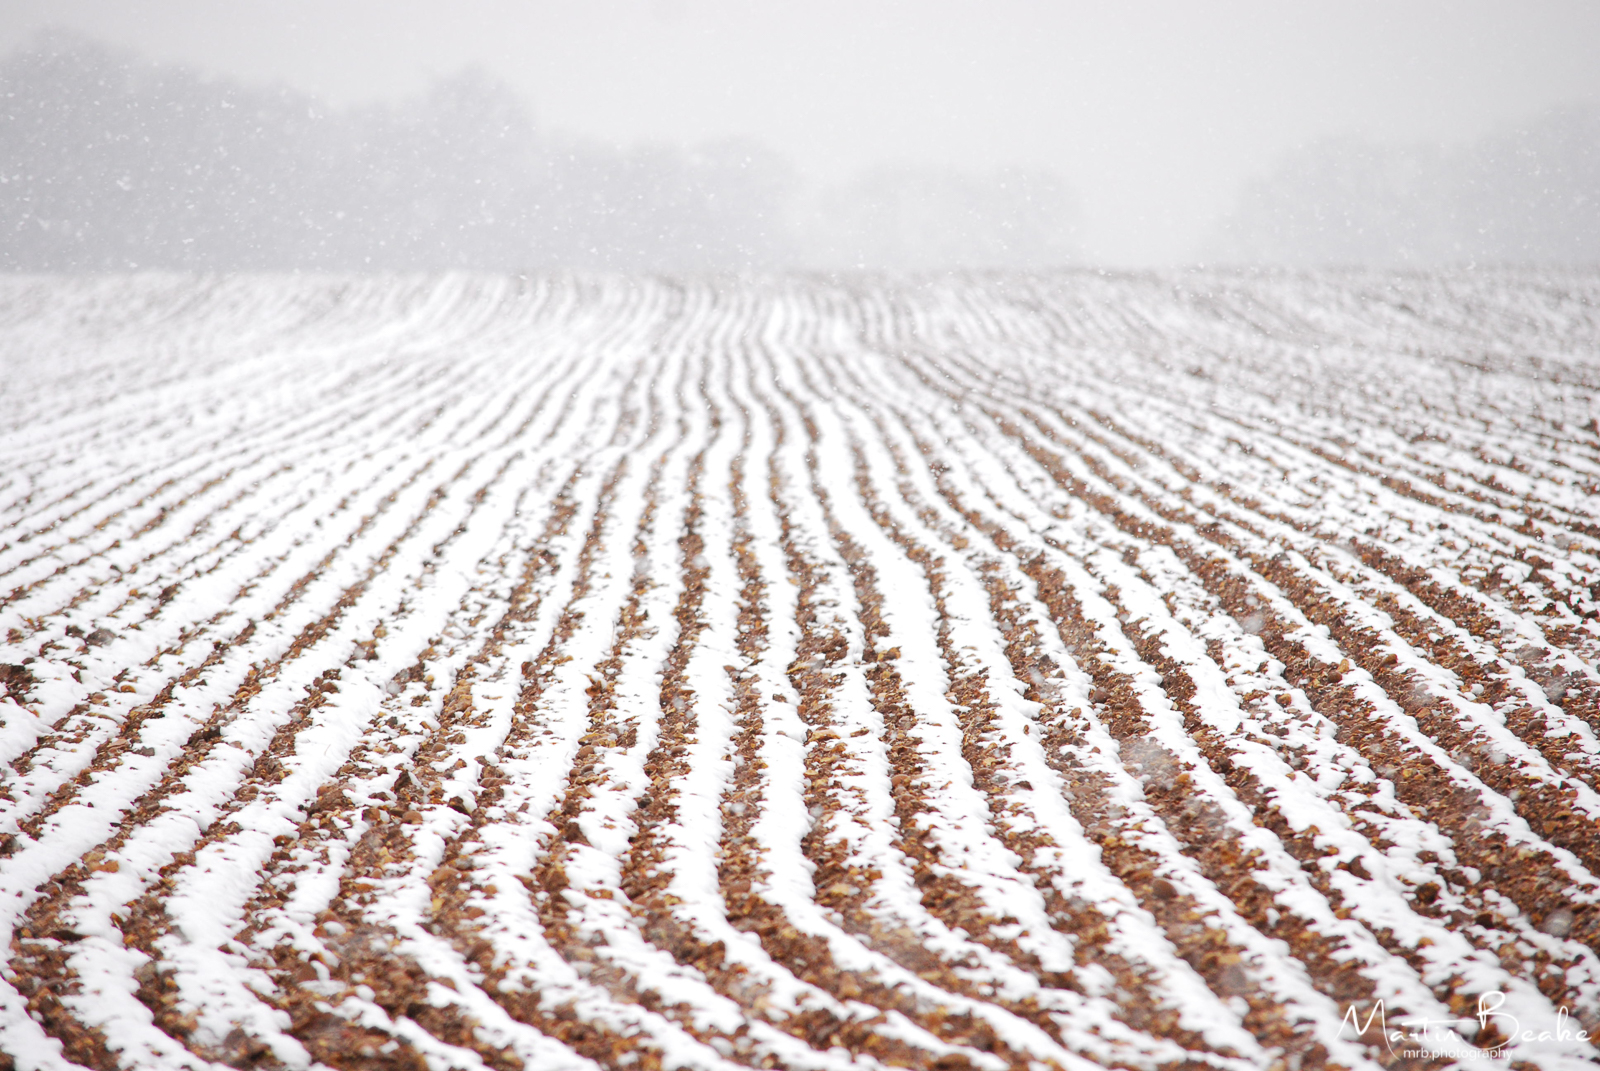 Snow Ploughed Field